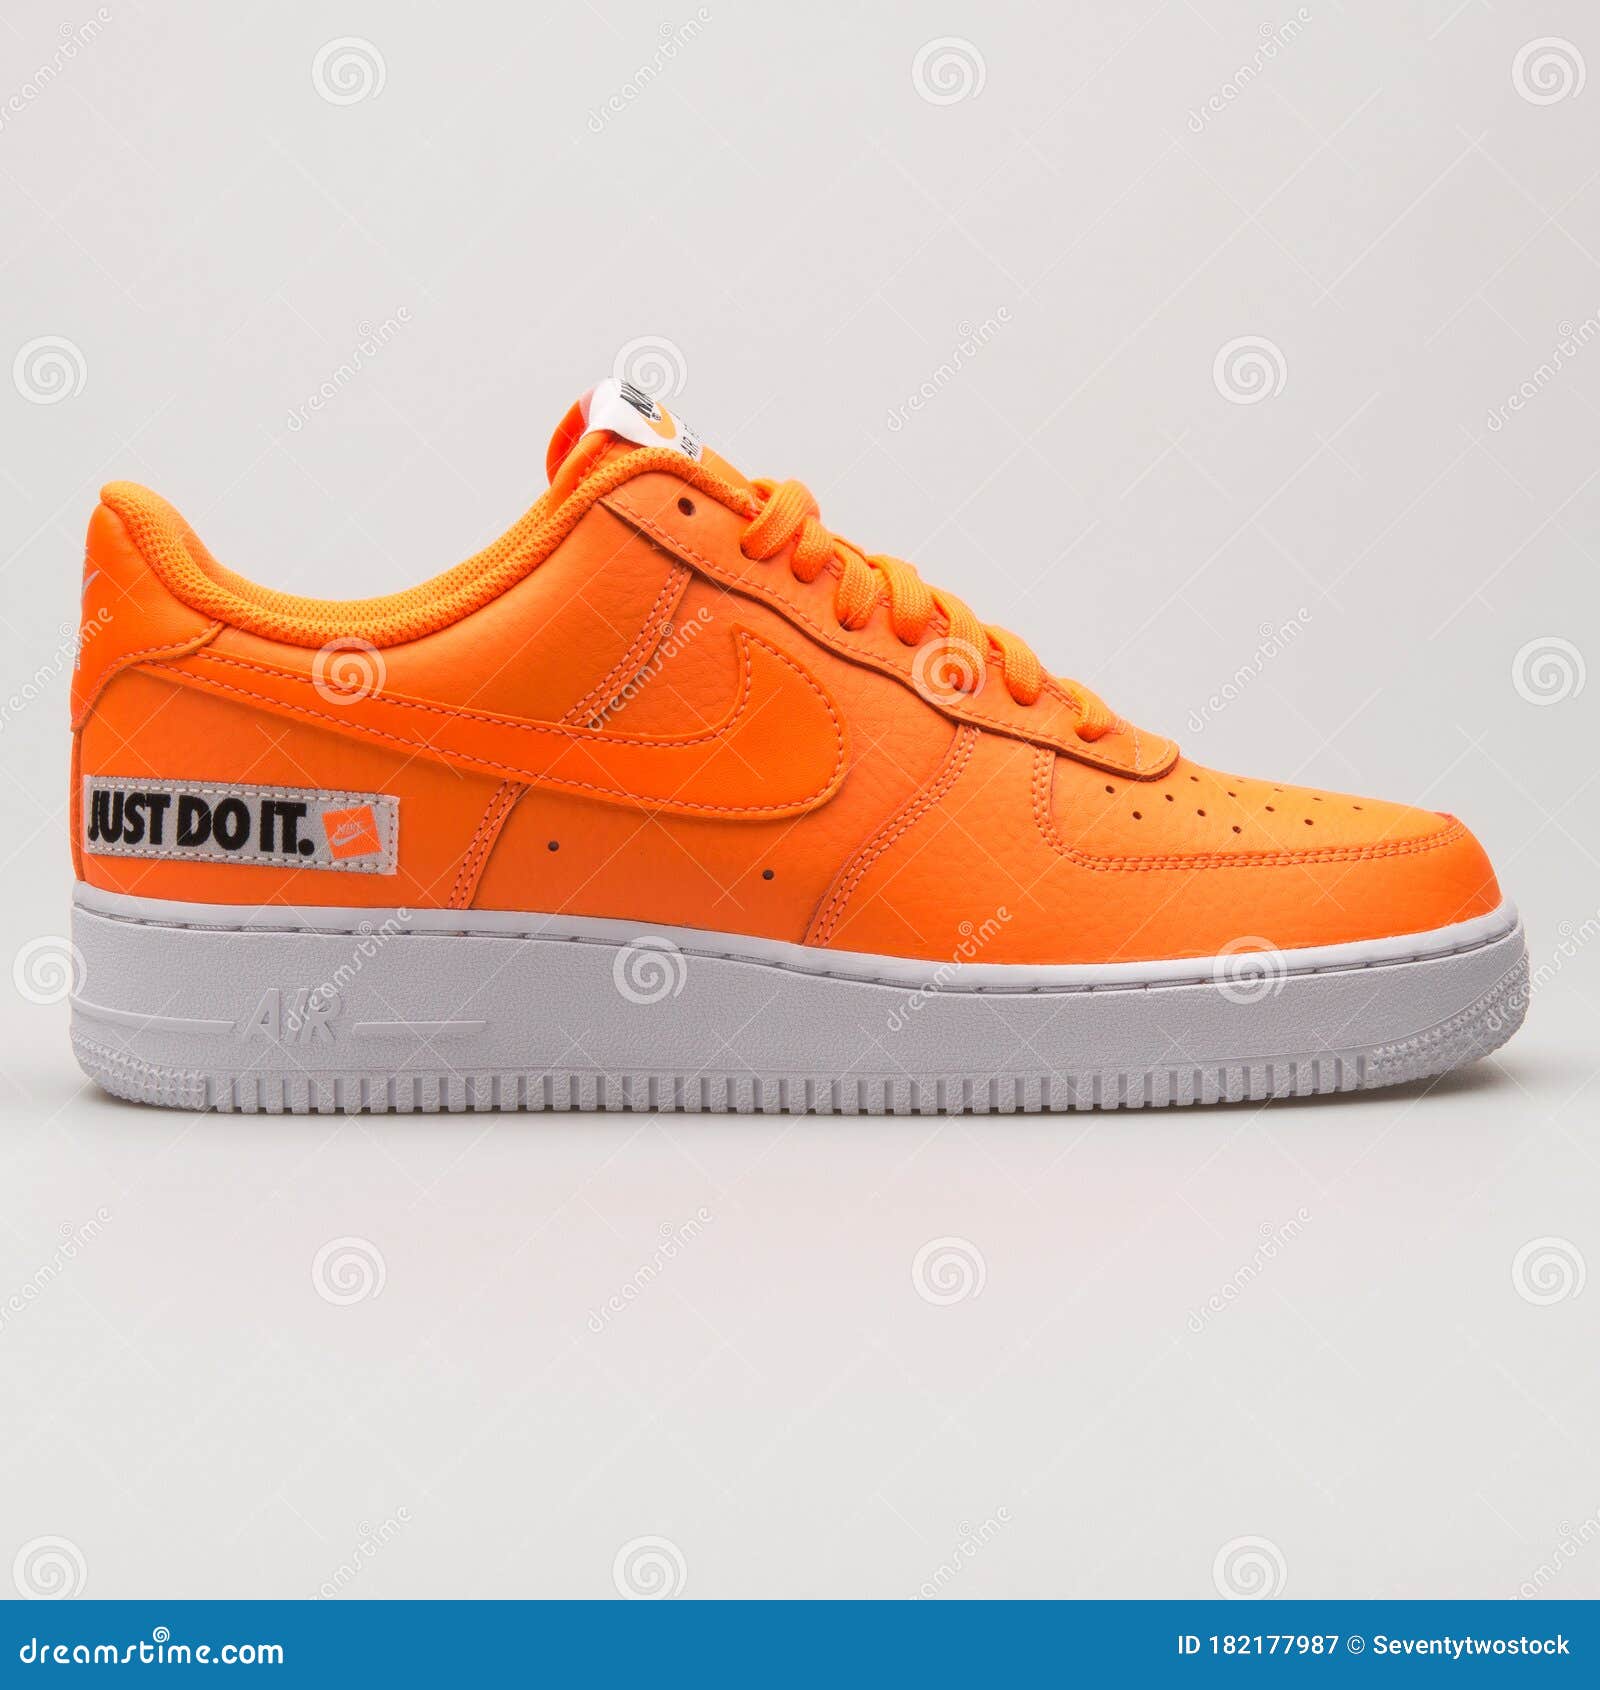 Nike Air Force 07 LV8 JDI Leather Orange and White Sneaker Editorial Photography - Image of footwear, isolated: 182177987